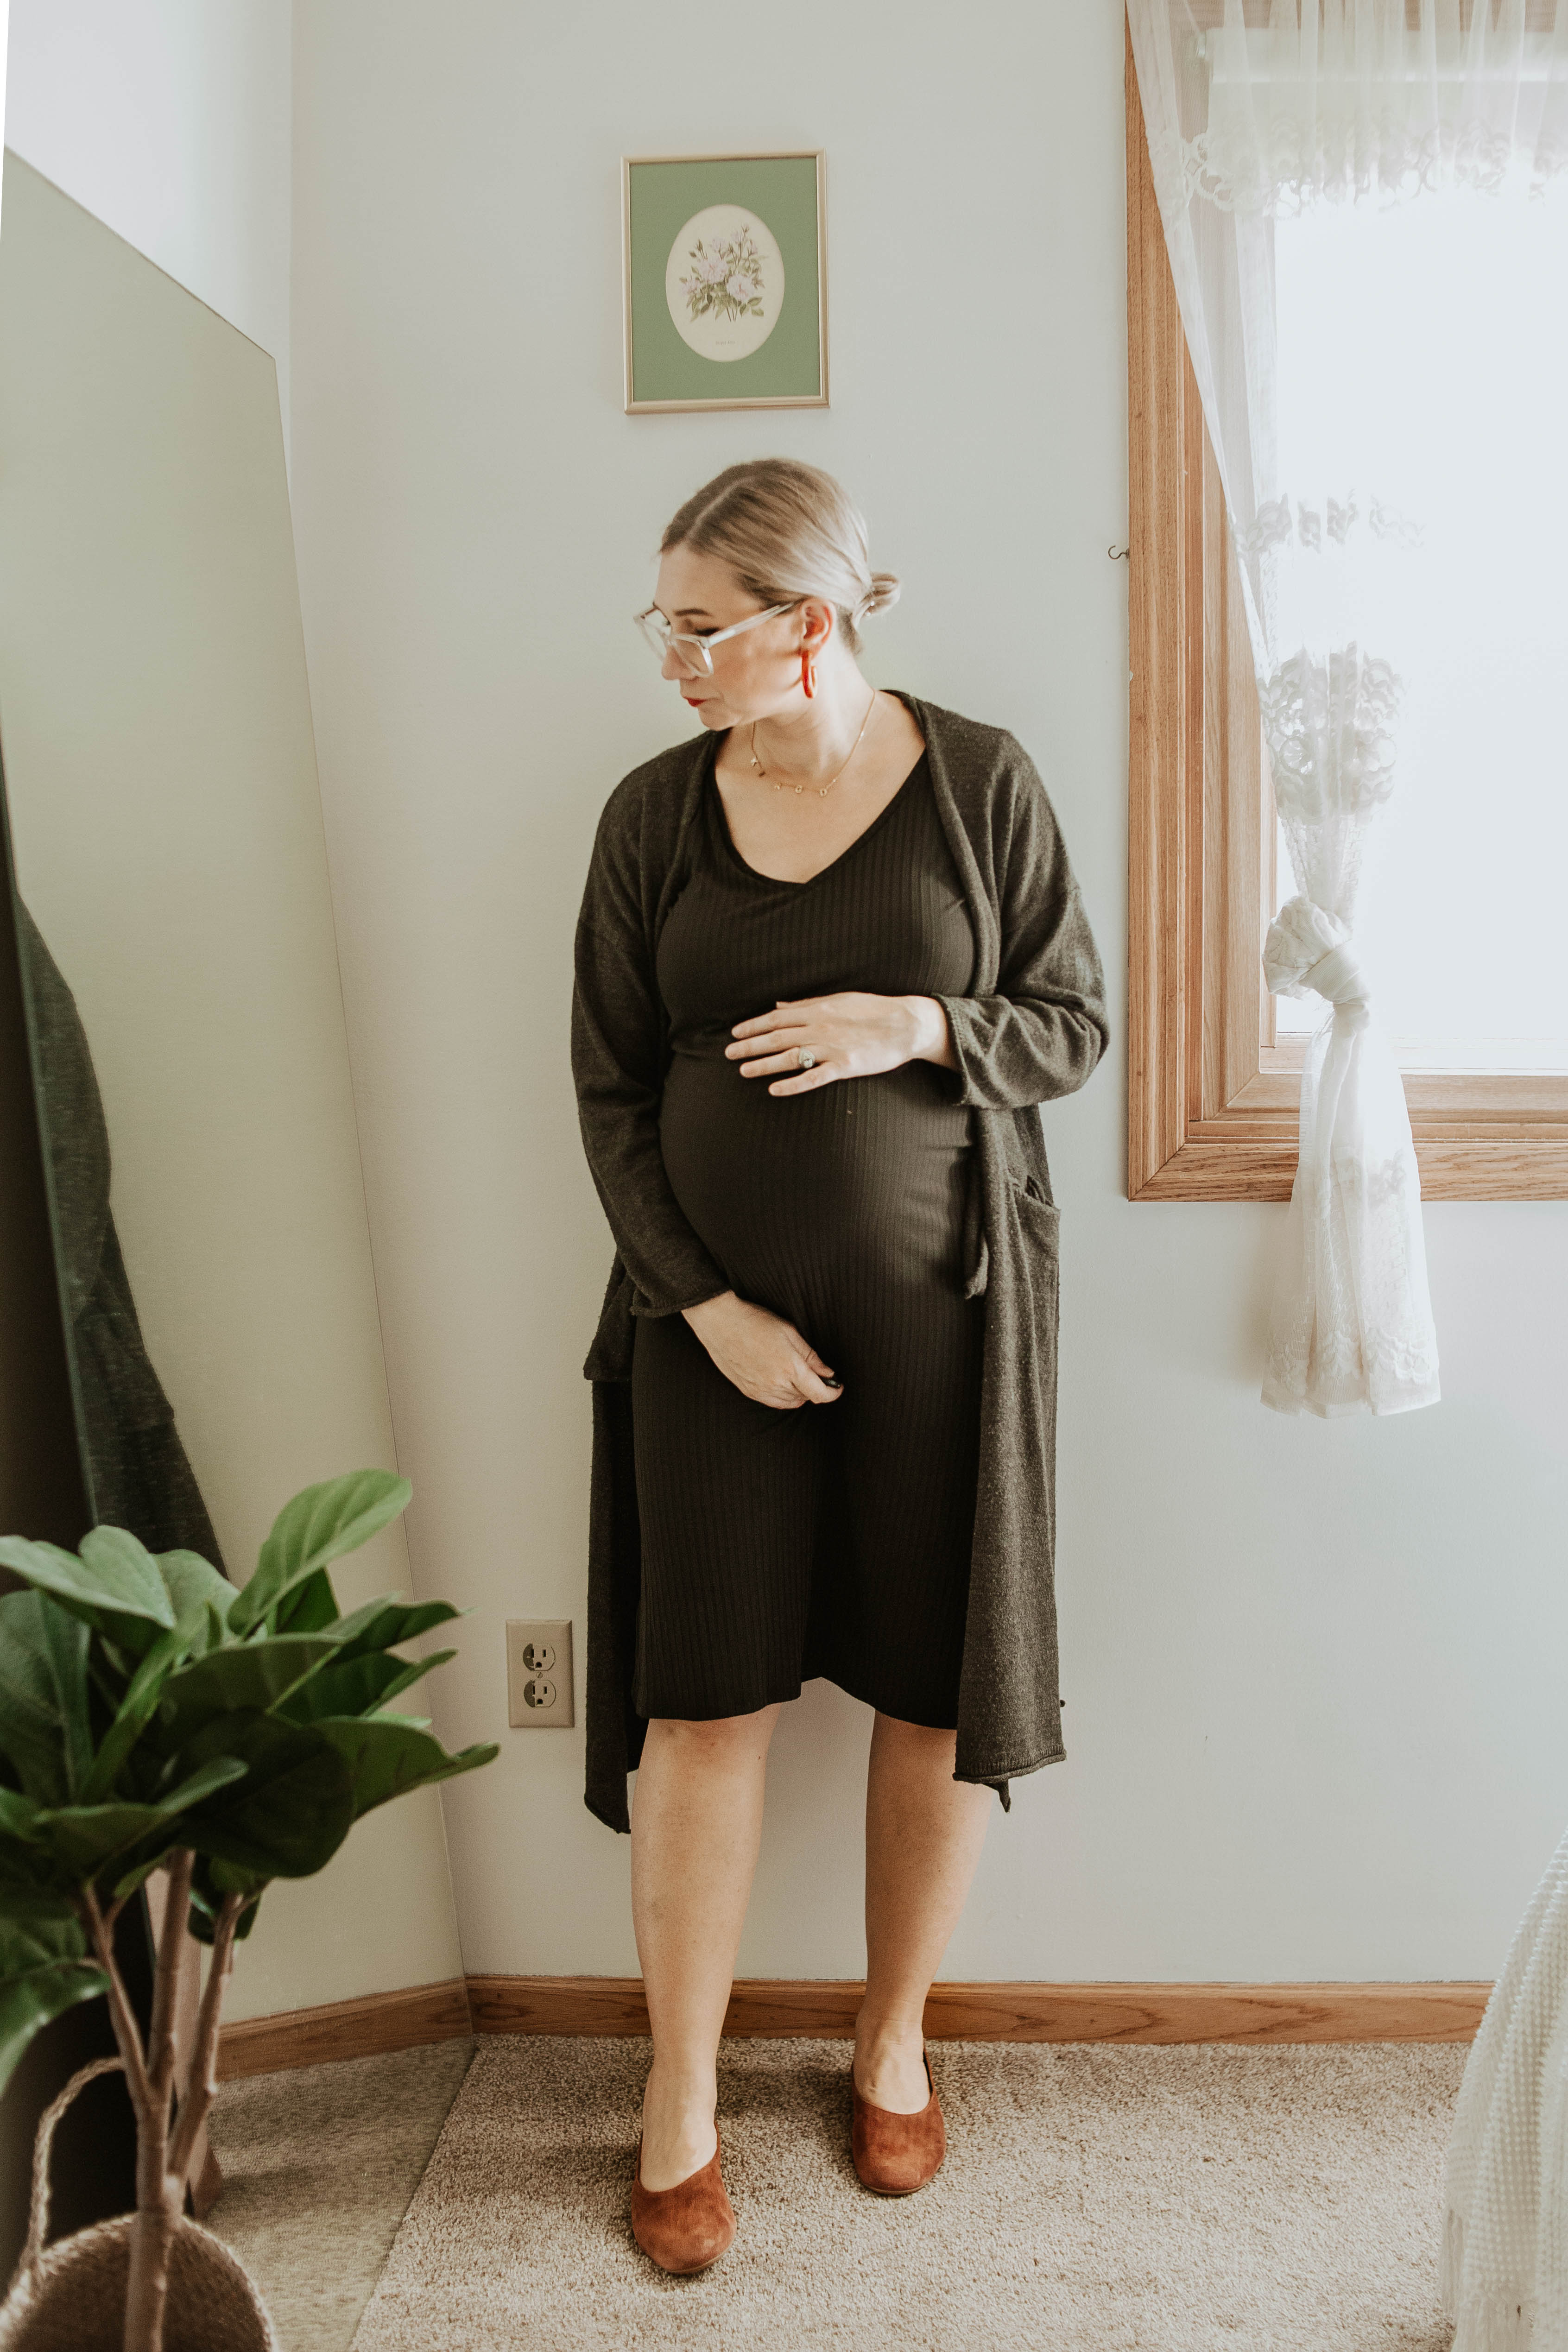 Maternity Look Book Featuring Mostly Ethical Fashion